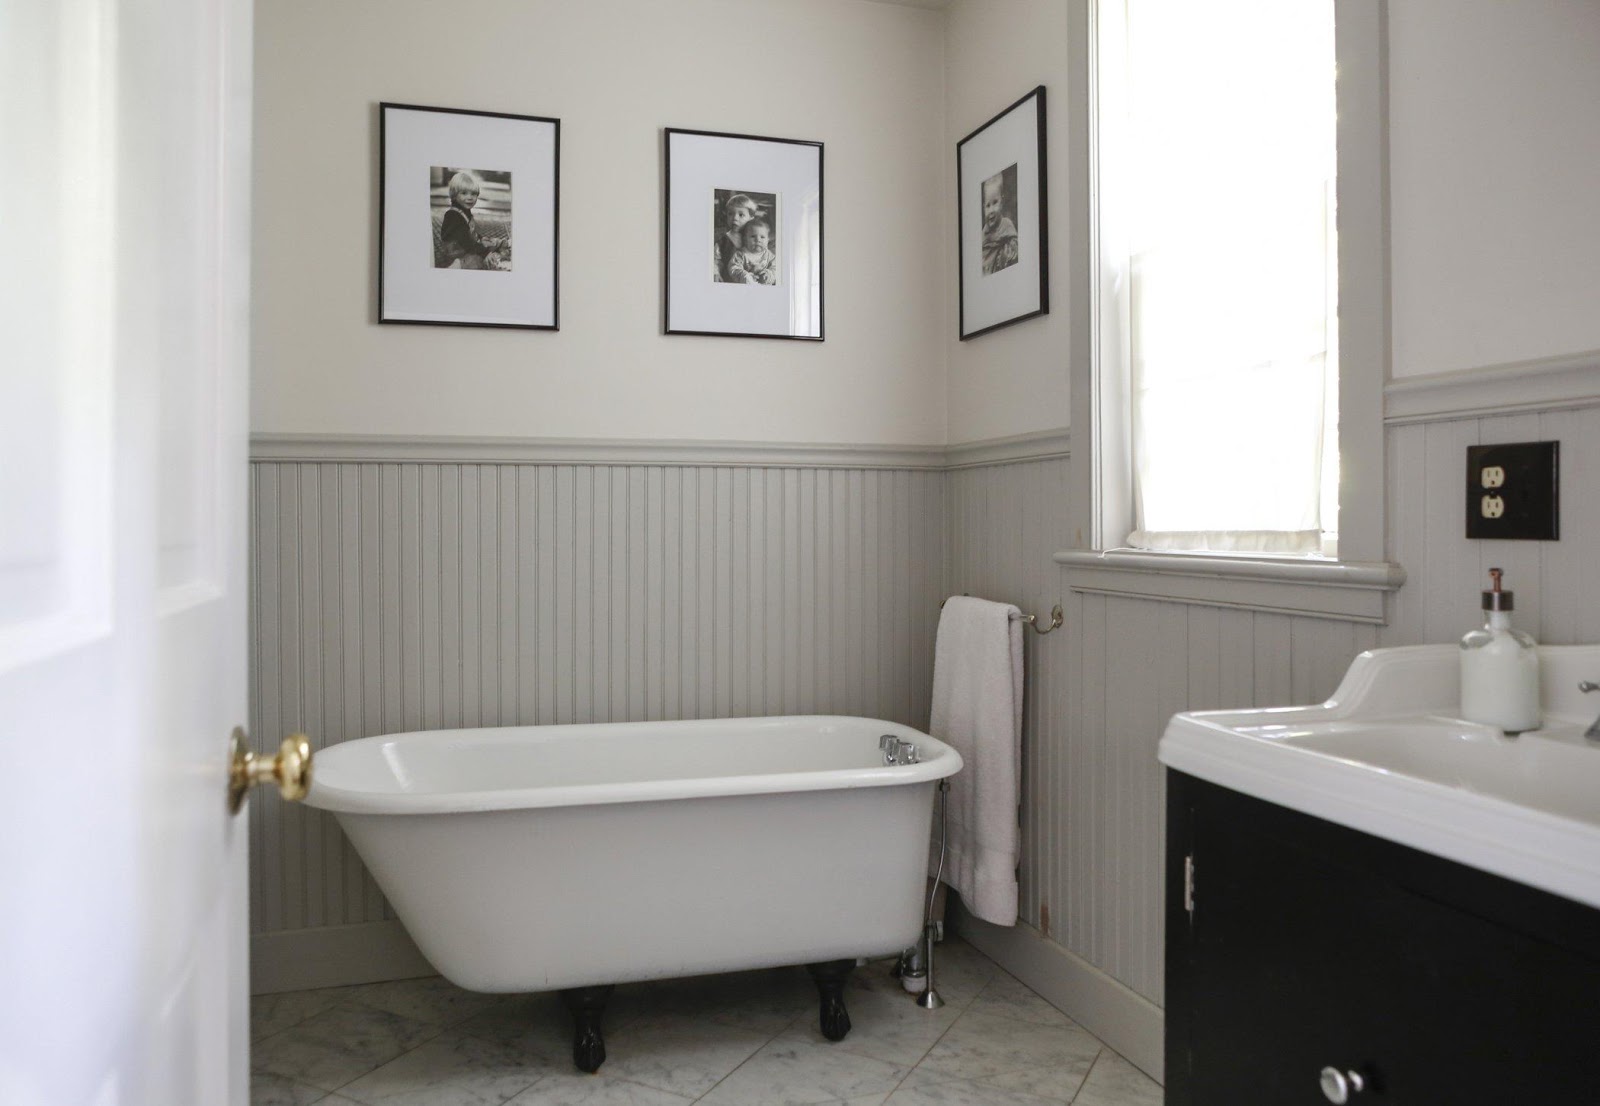 27 Incredible Wainscoting Bathroom Ideas for Every Need